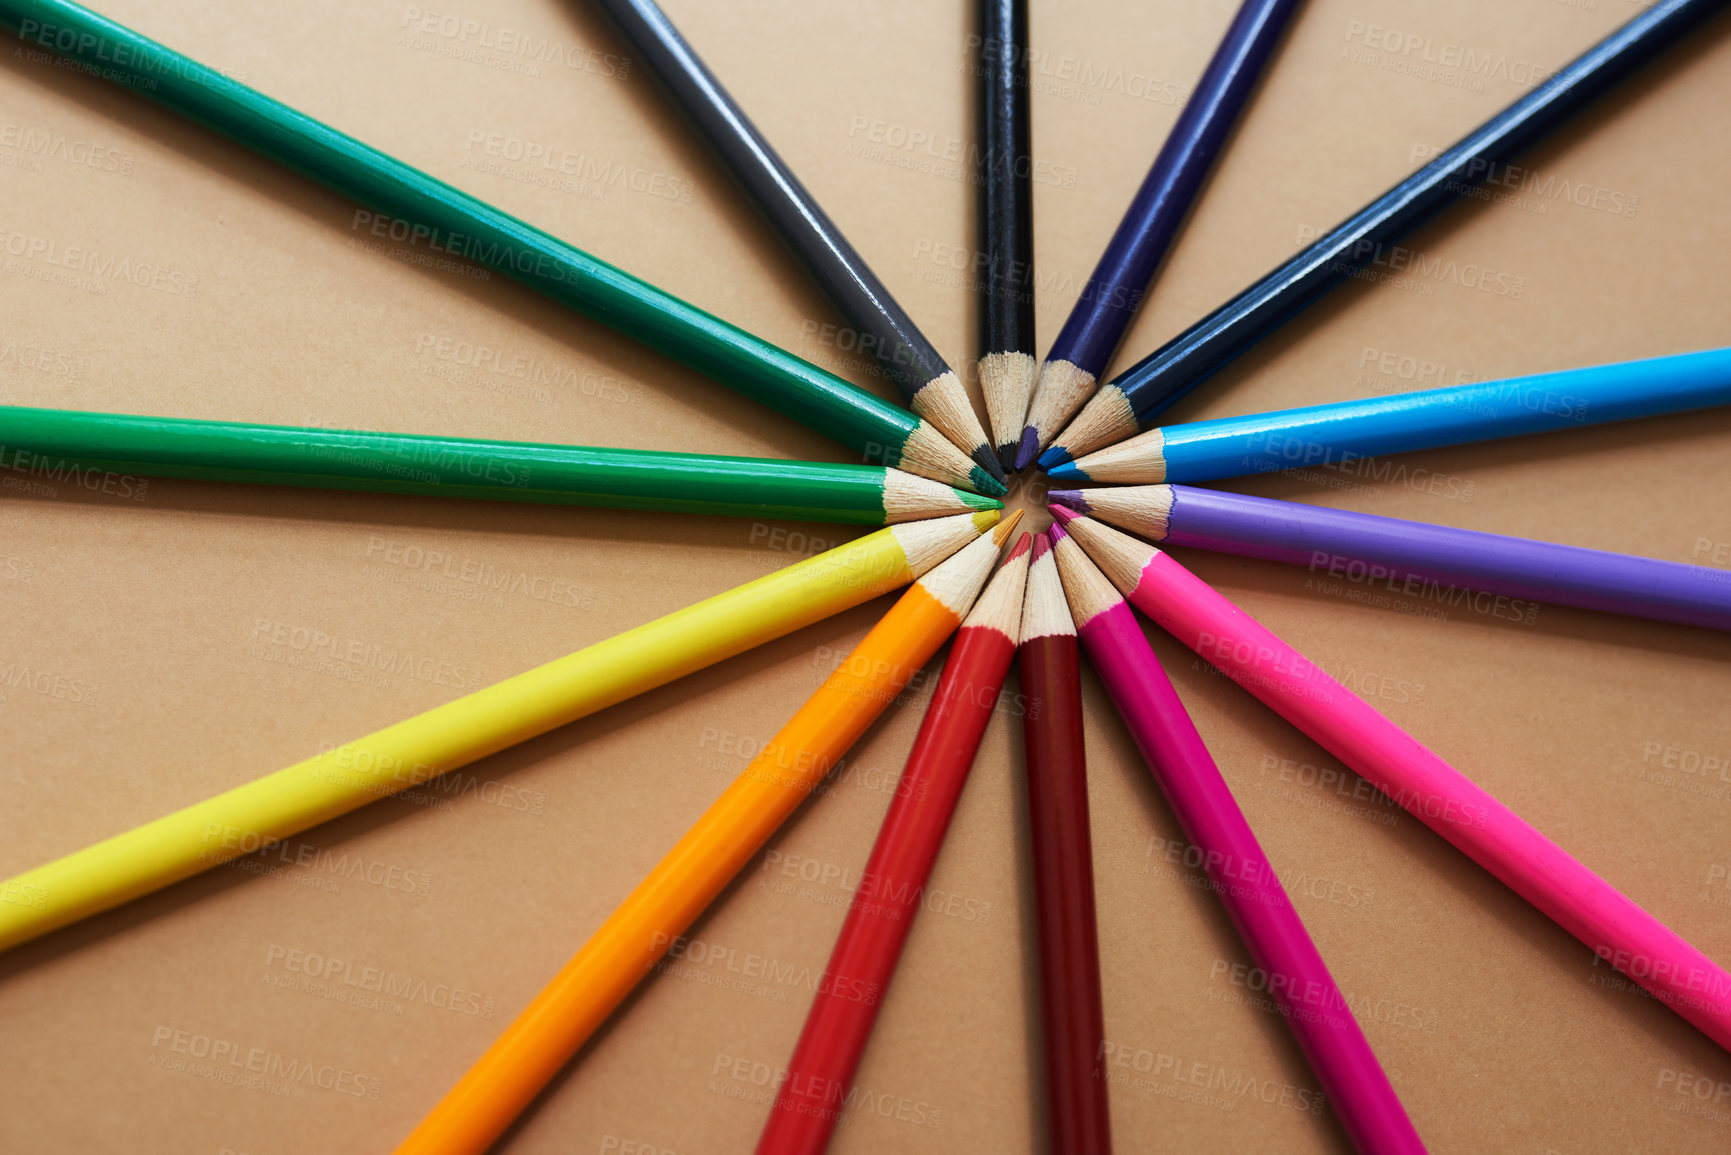 Buy stock photo Studio shot of different coloured pencils against a brown background